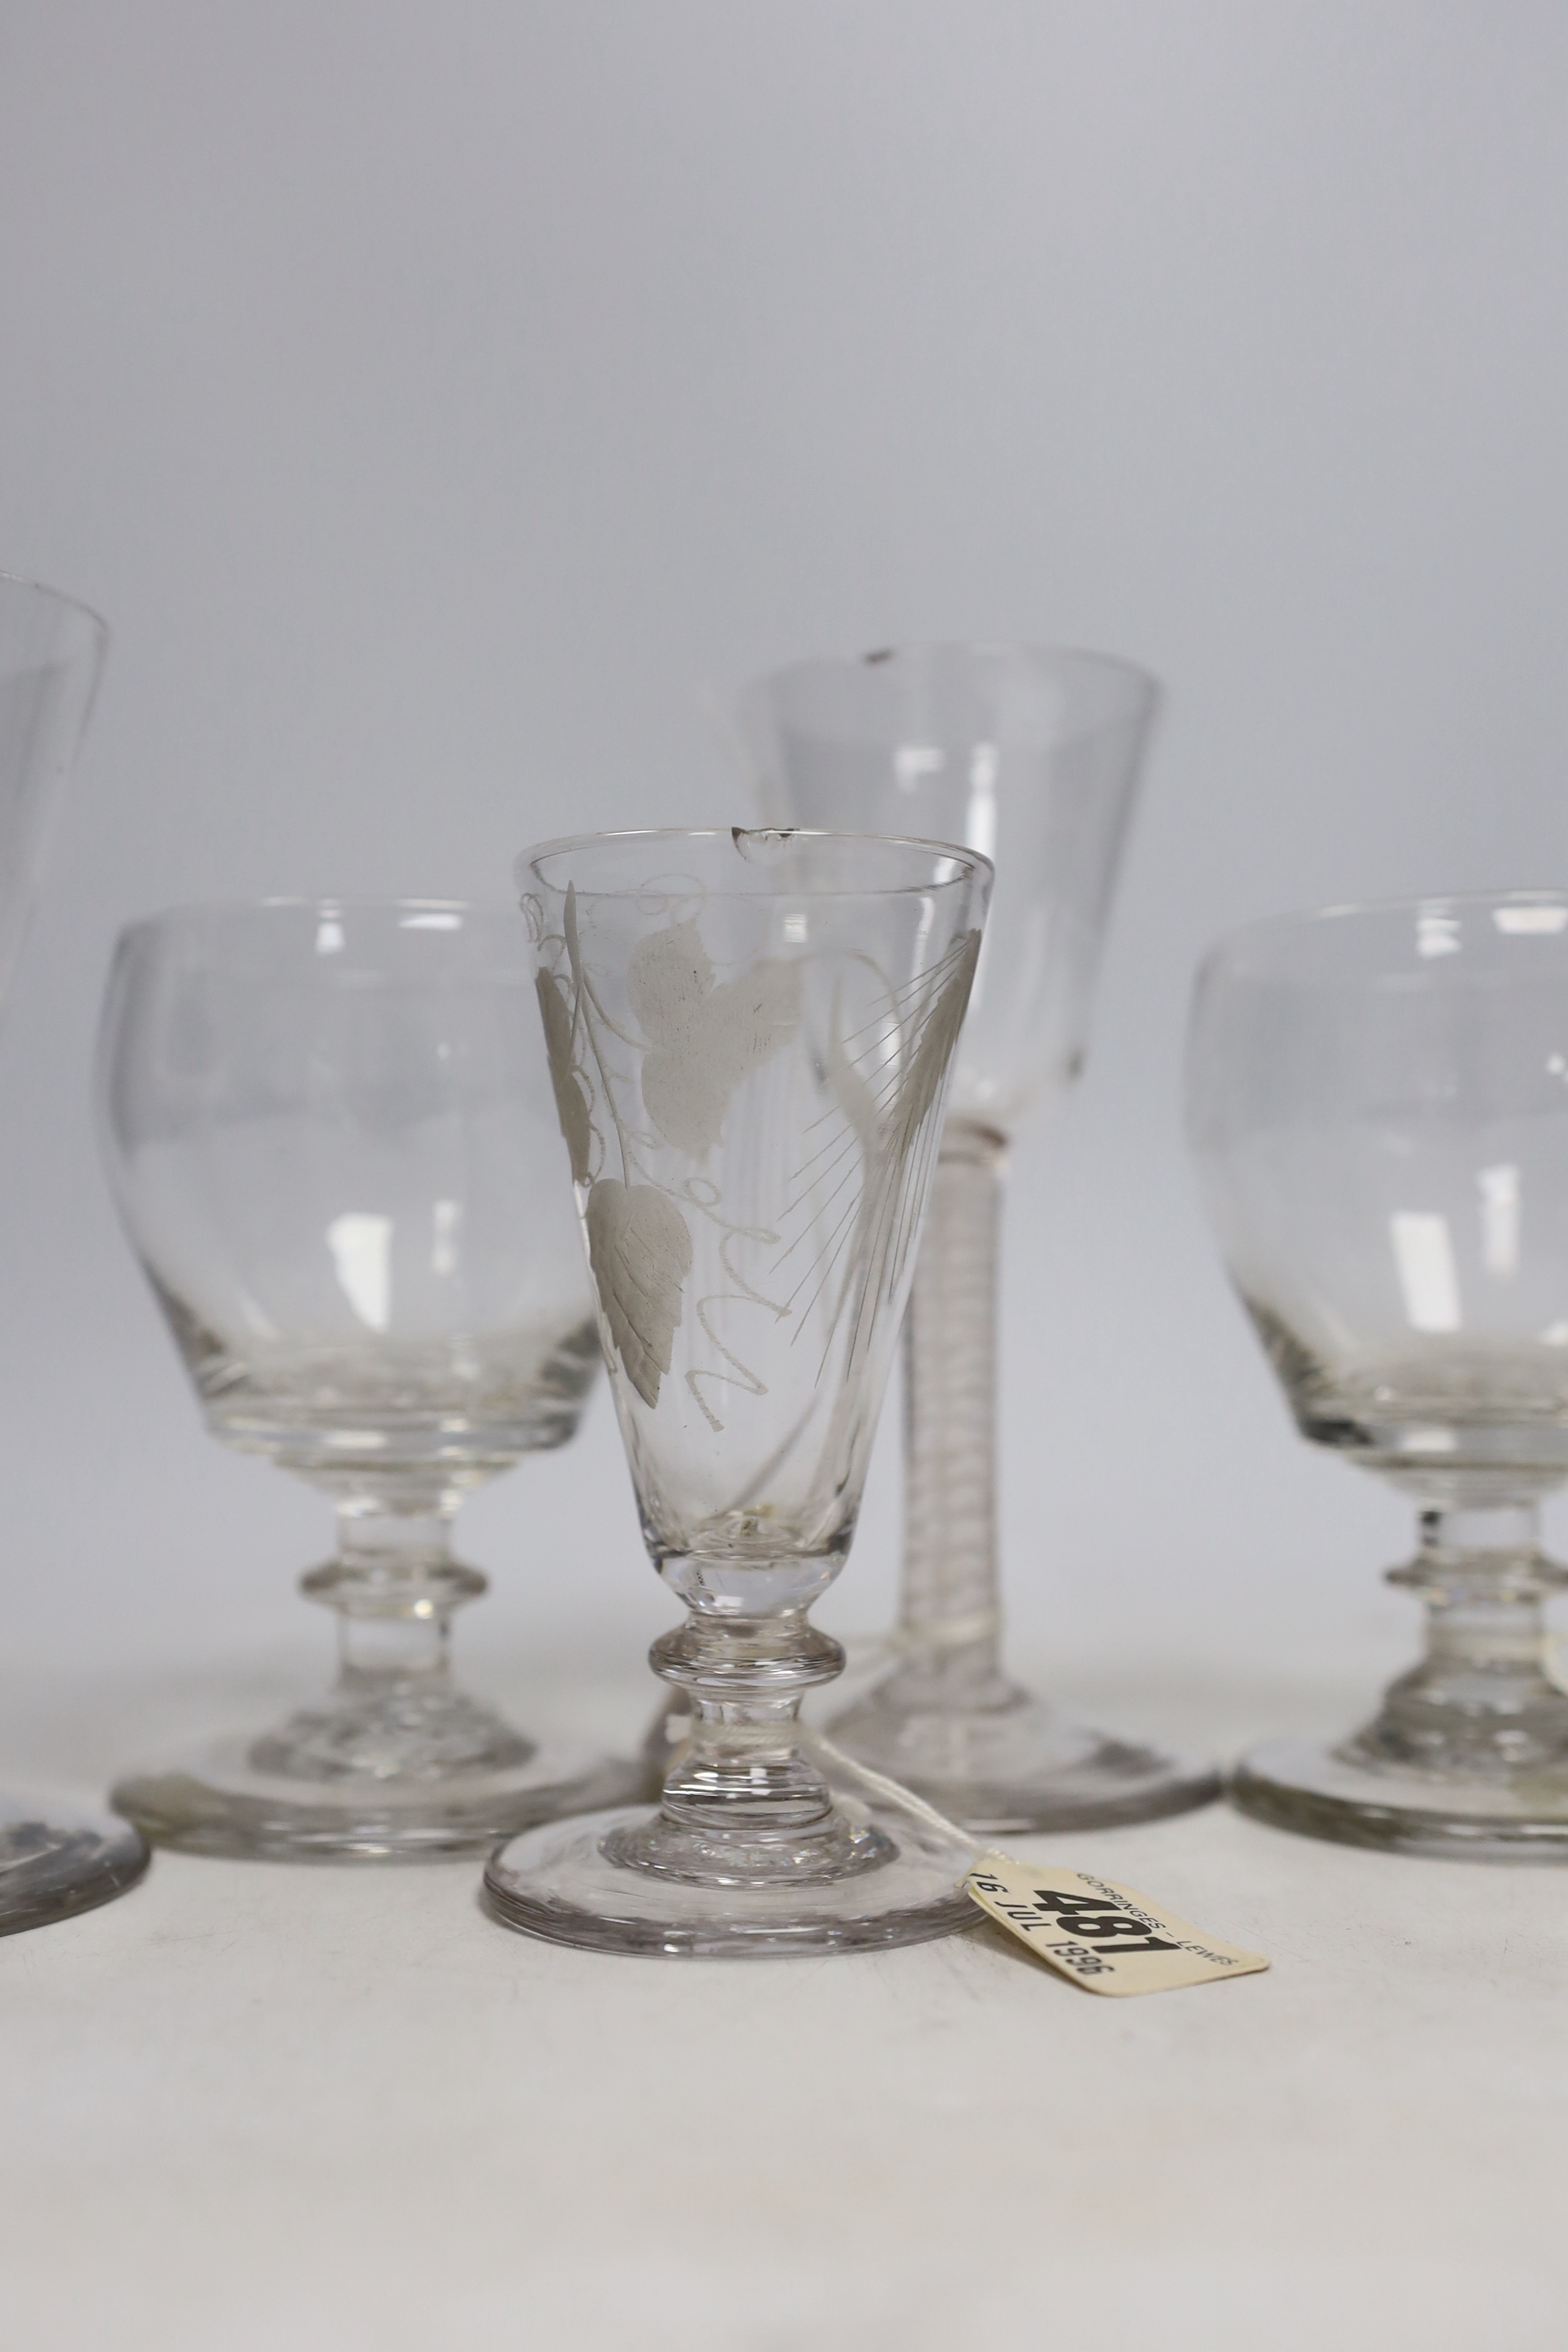 Two late 18th century DSOT Wine glasses, two dwarf ale glasses with engraved hops and barley, and - Image 2 of 4